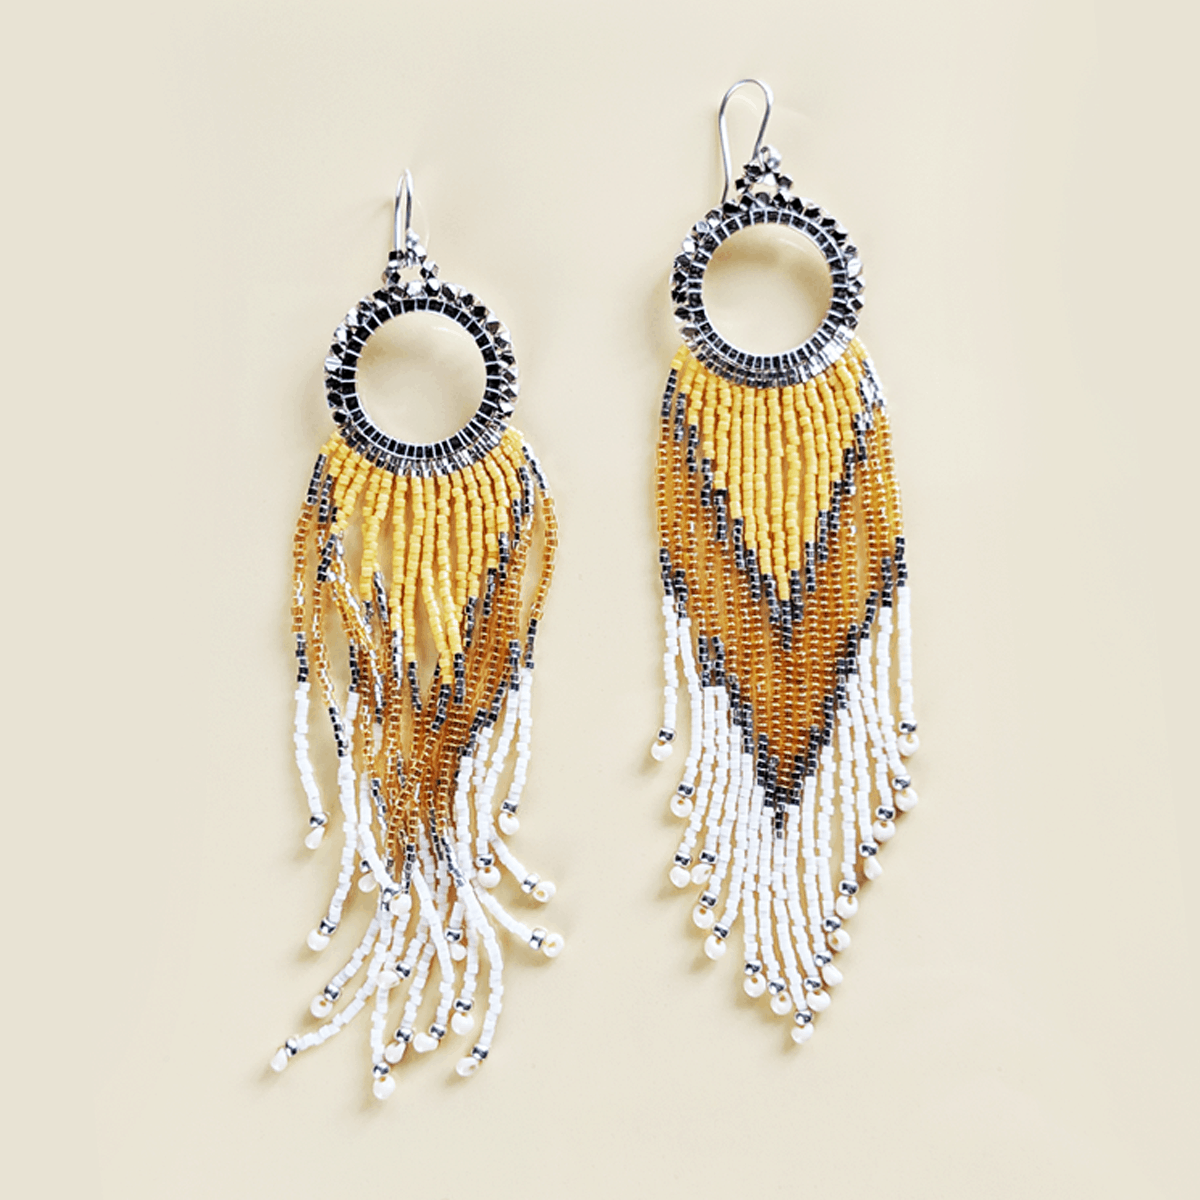 Earrings with tassels and beads